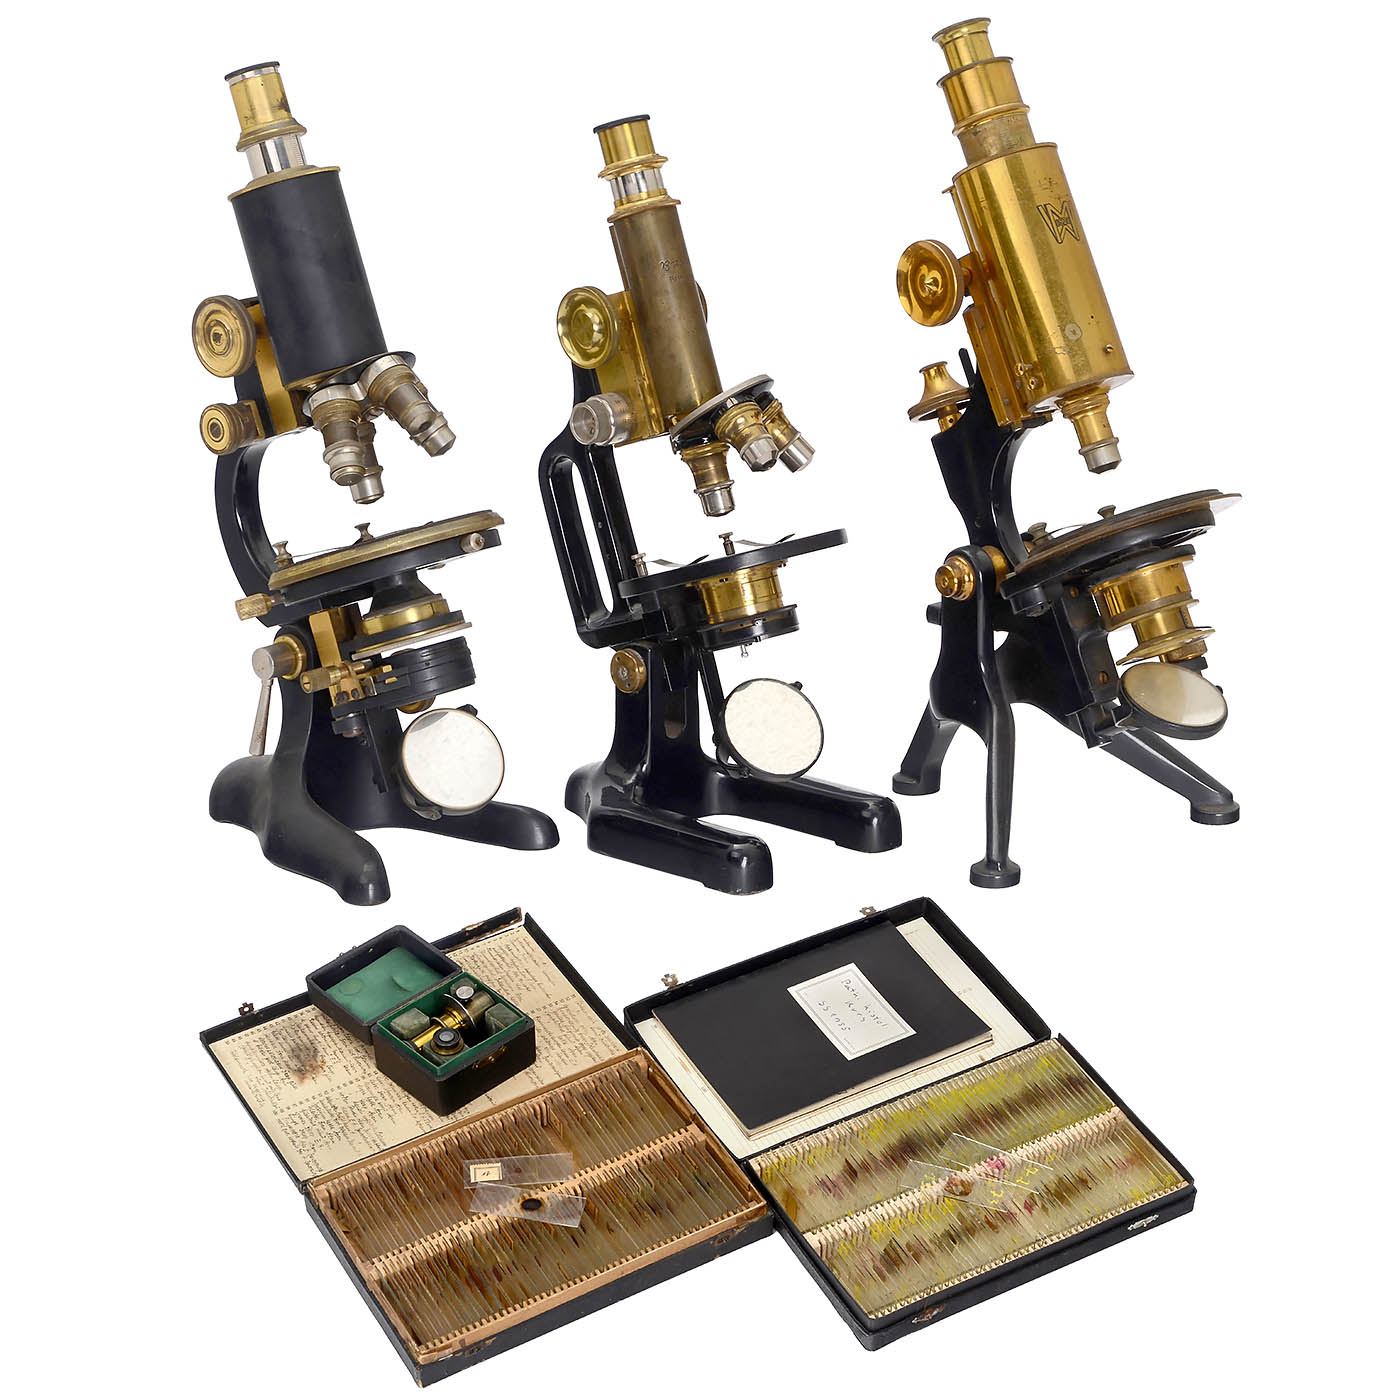 3 Microscopes and 2 Sets of Preparations